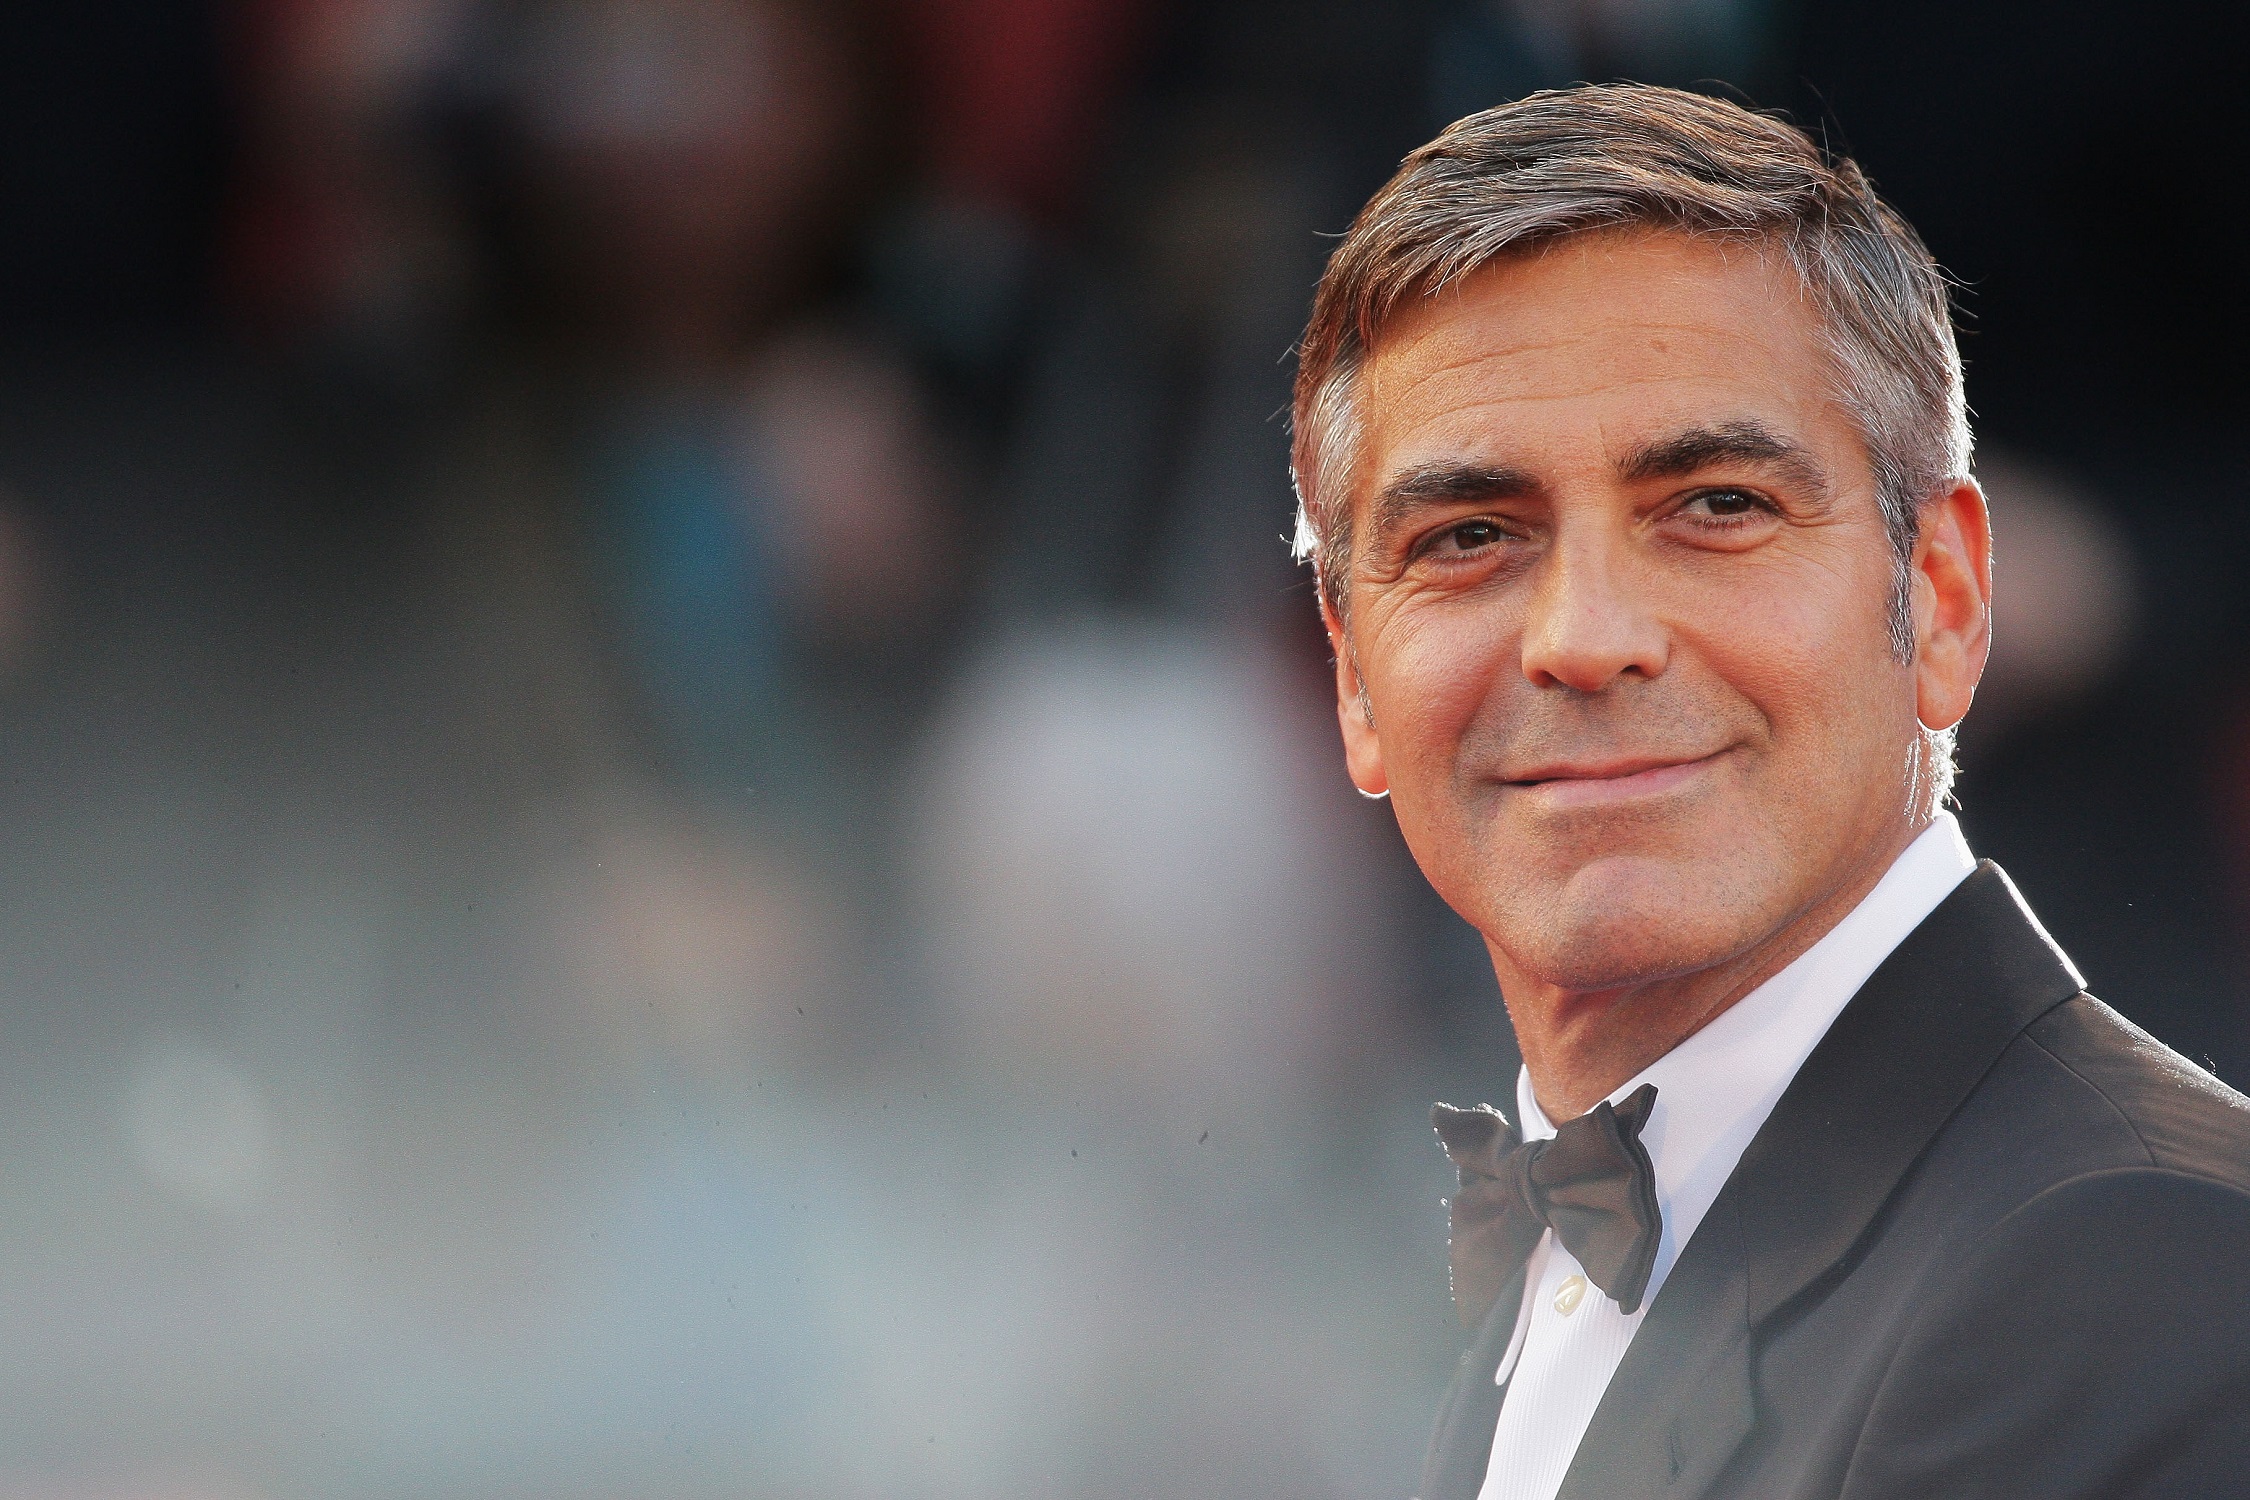 George Clooney attends 'The Men Who Stare At Goats' Premiere at the Sala Grande